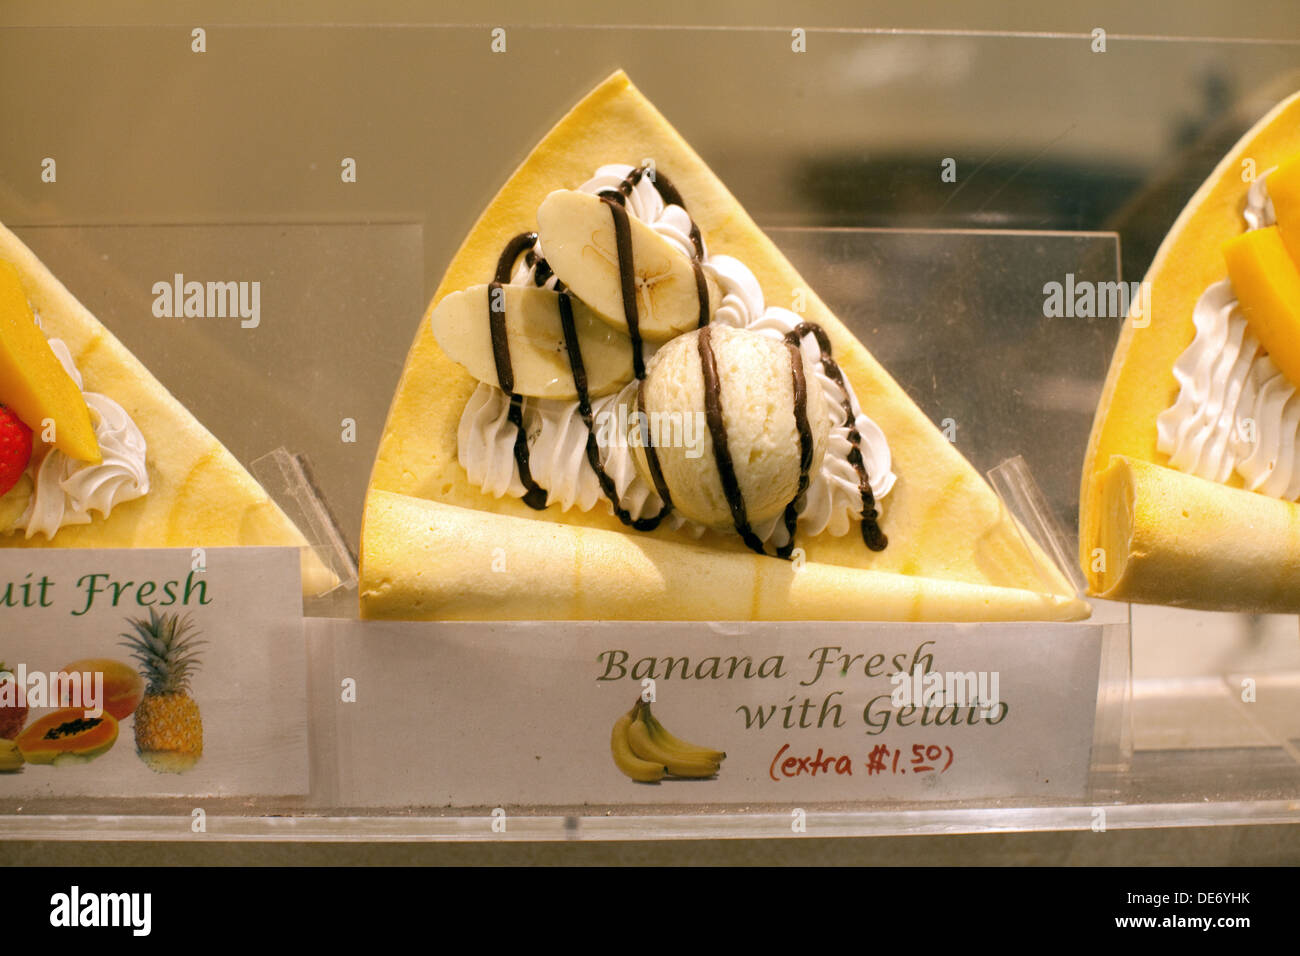 Display case selling fresh fruit crepe with banana and gelato.  A favorite Japanese style crepe dessert. Stock Photo